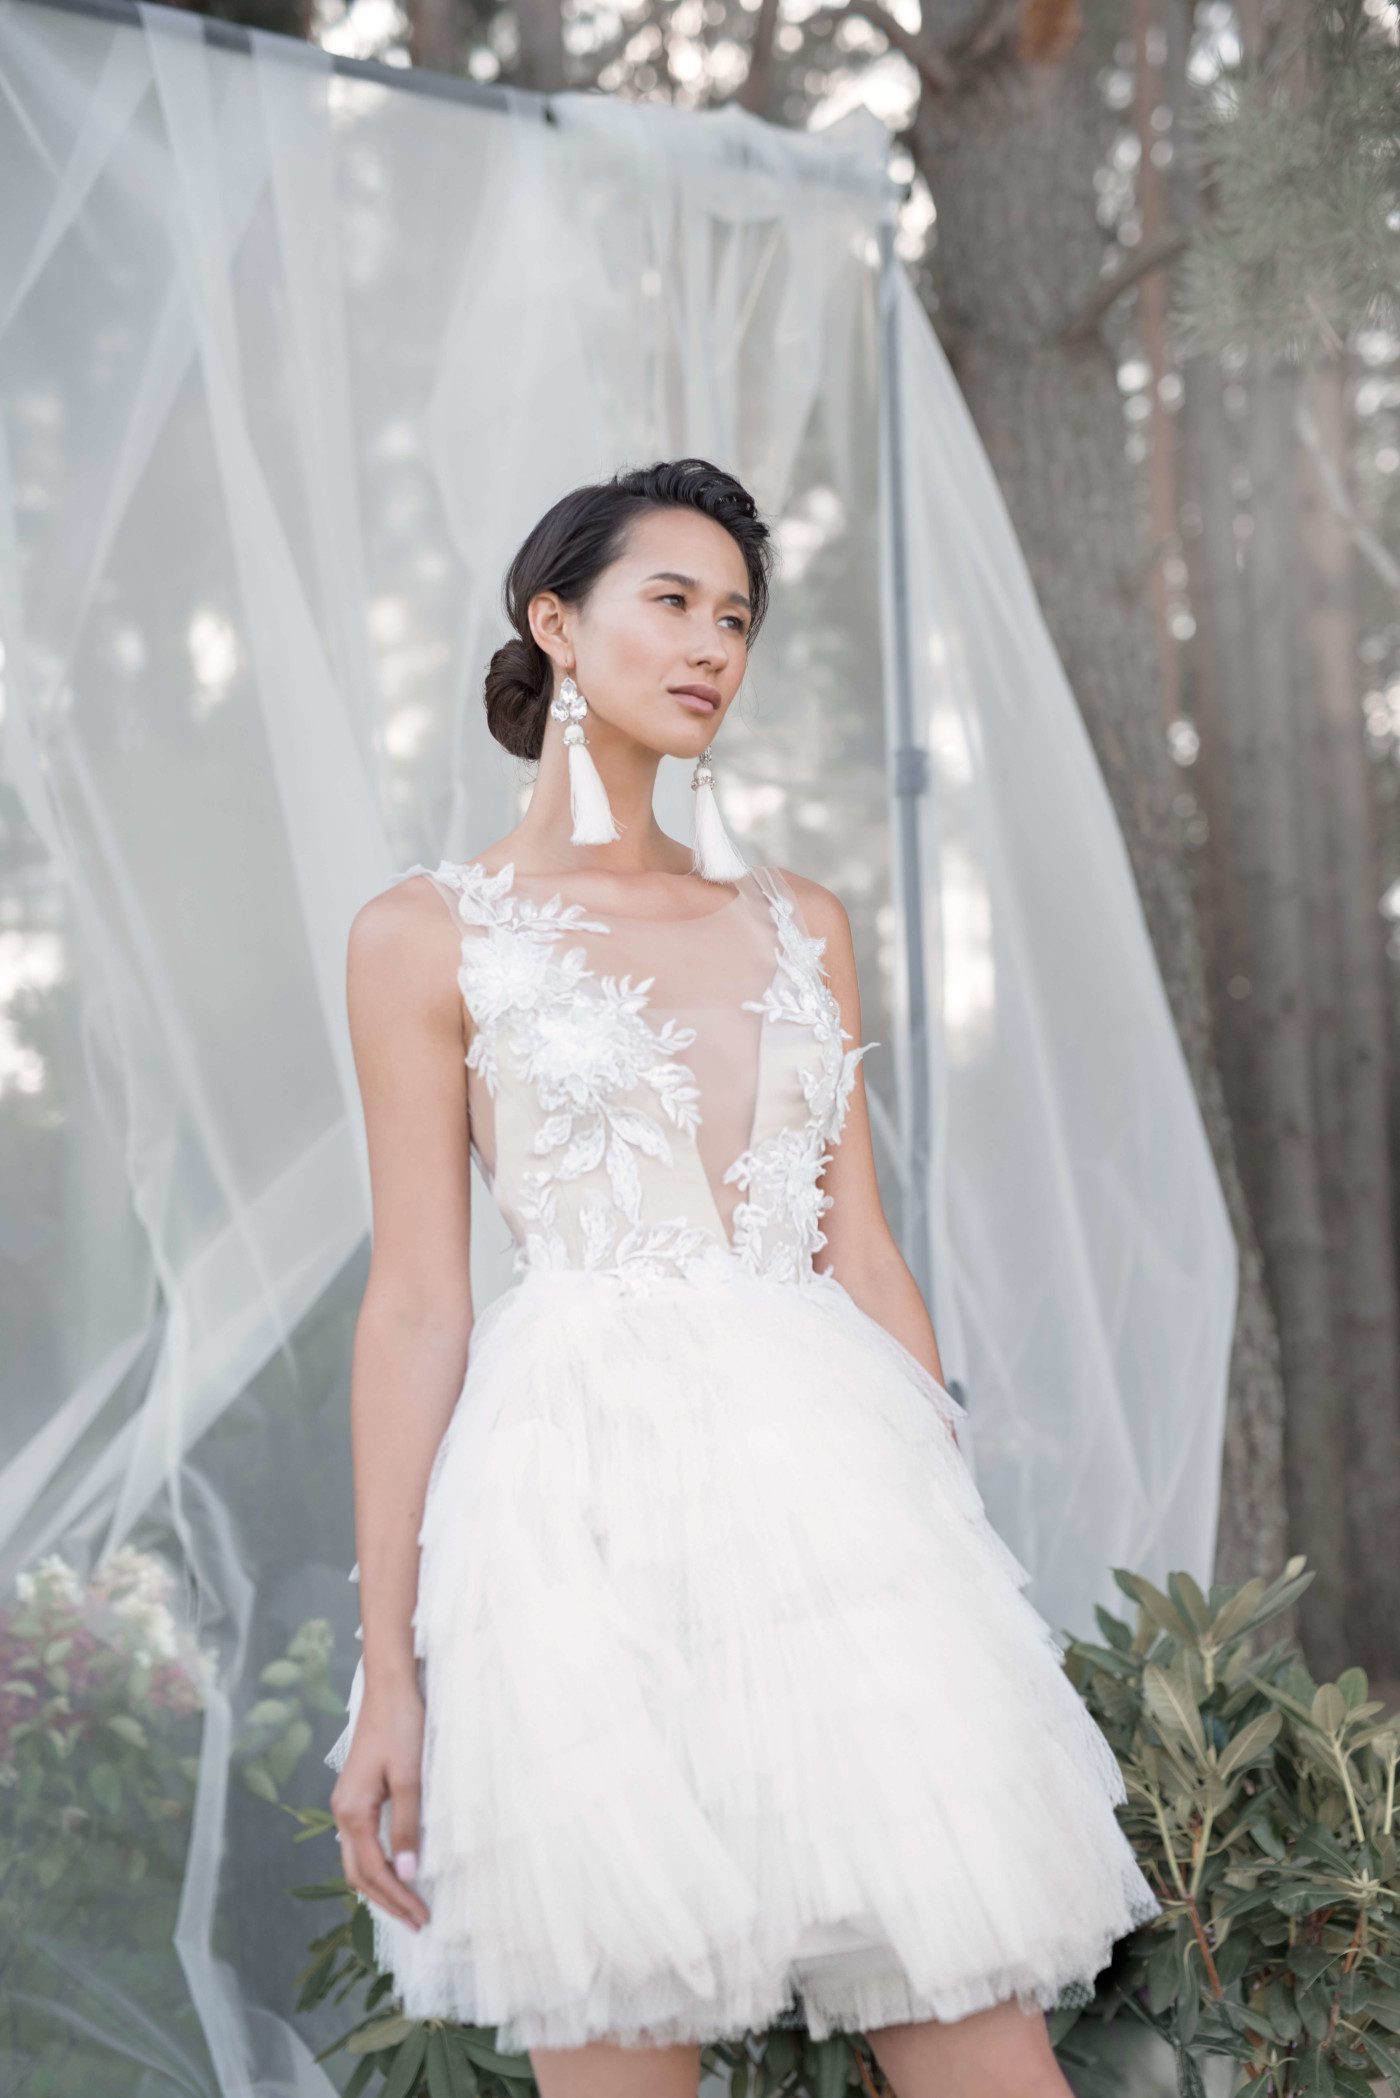 A bride wearing wedding dress with short skirt with horizontal flounces and lace bodice decorated with volume flowers by Rara Avis at Dell'Amore Bridal, Auckland, NZ. 4